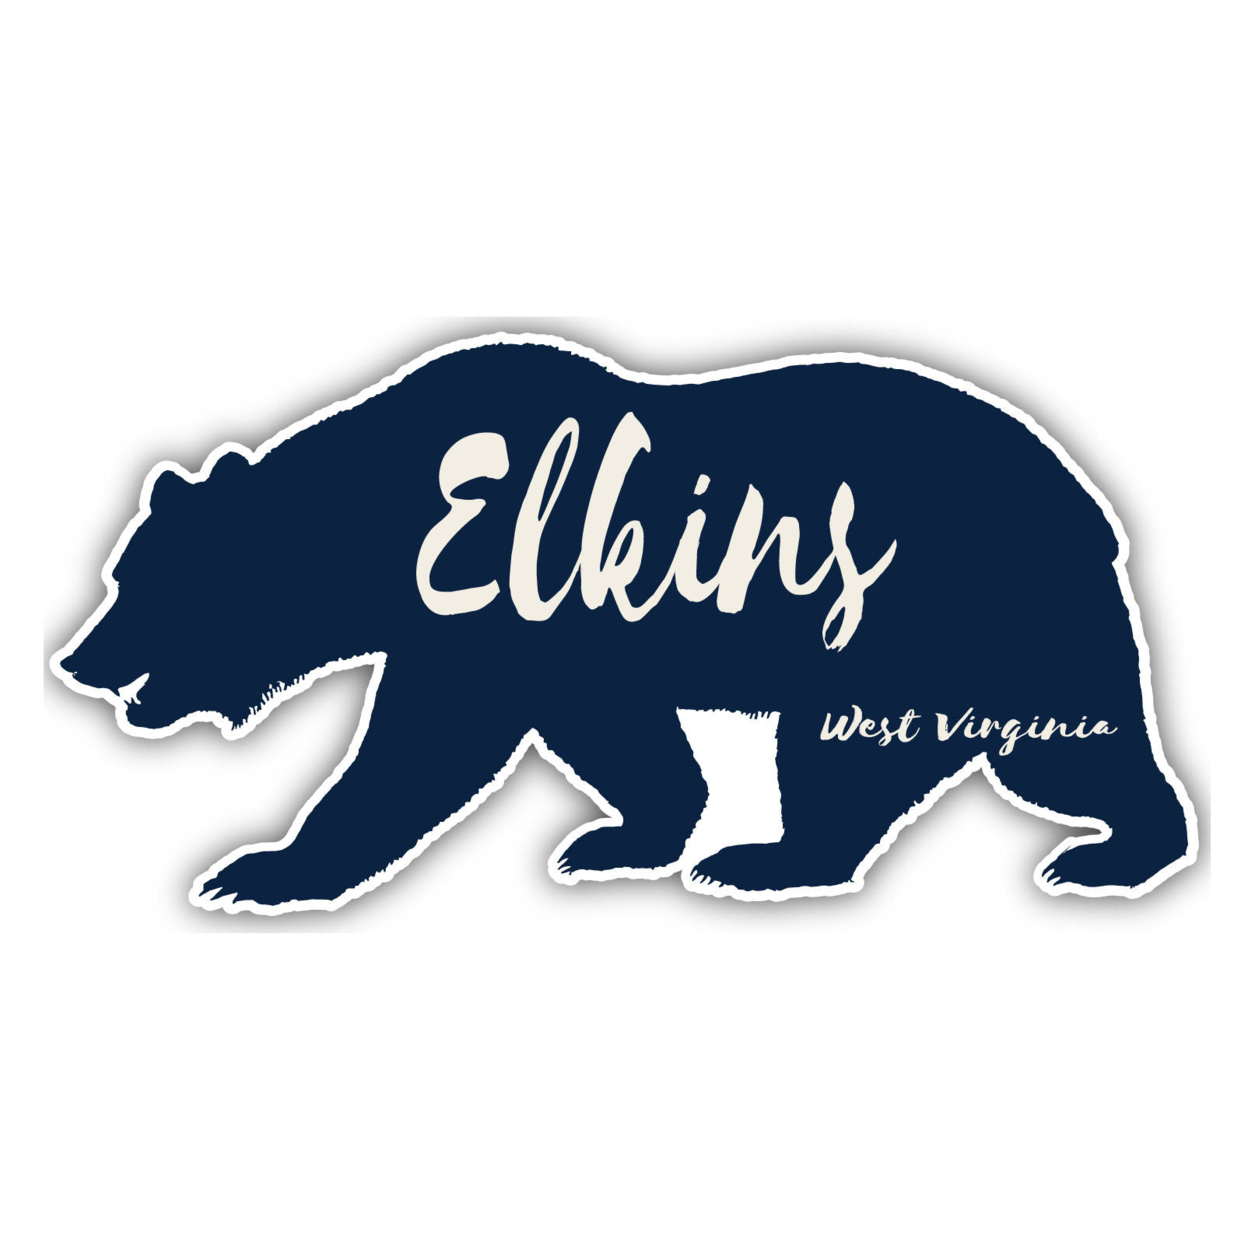 Elkins West Virginia Souvenir Decorative Stickers (Choose Theme And Size) - 4-Pack, 6-Inch, Bear